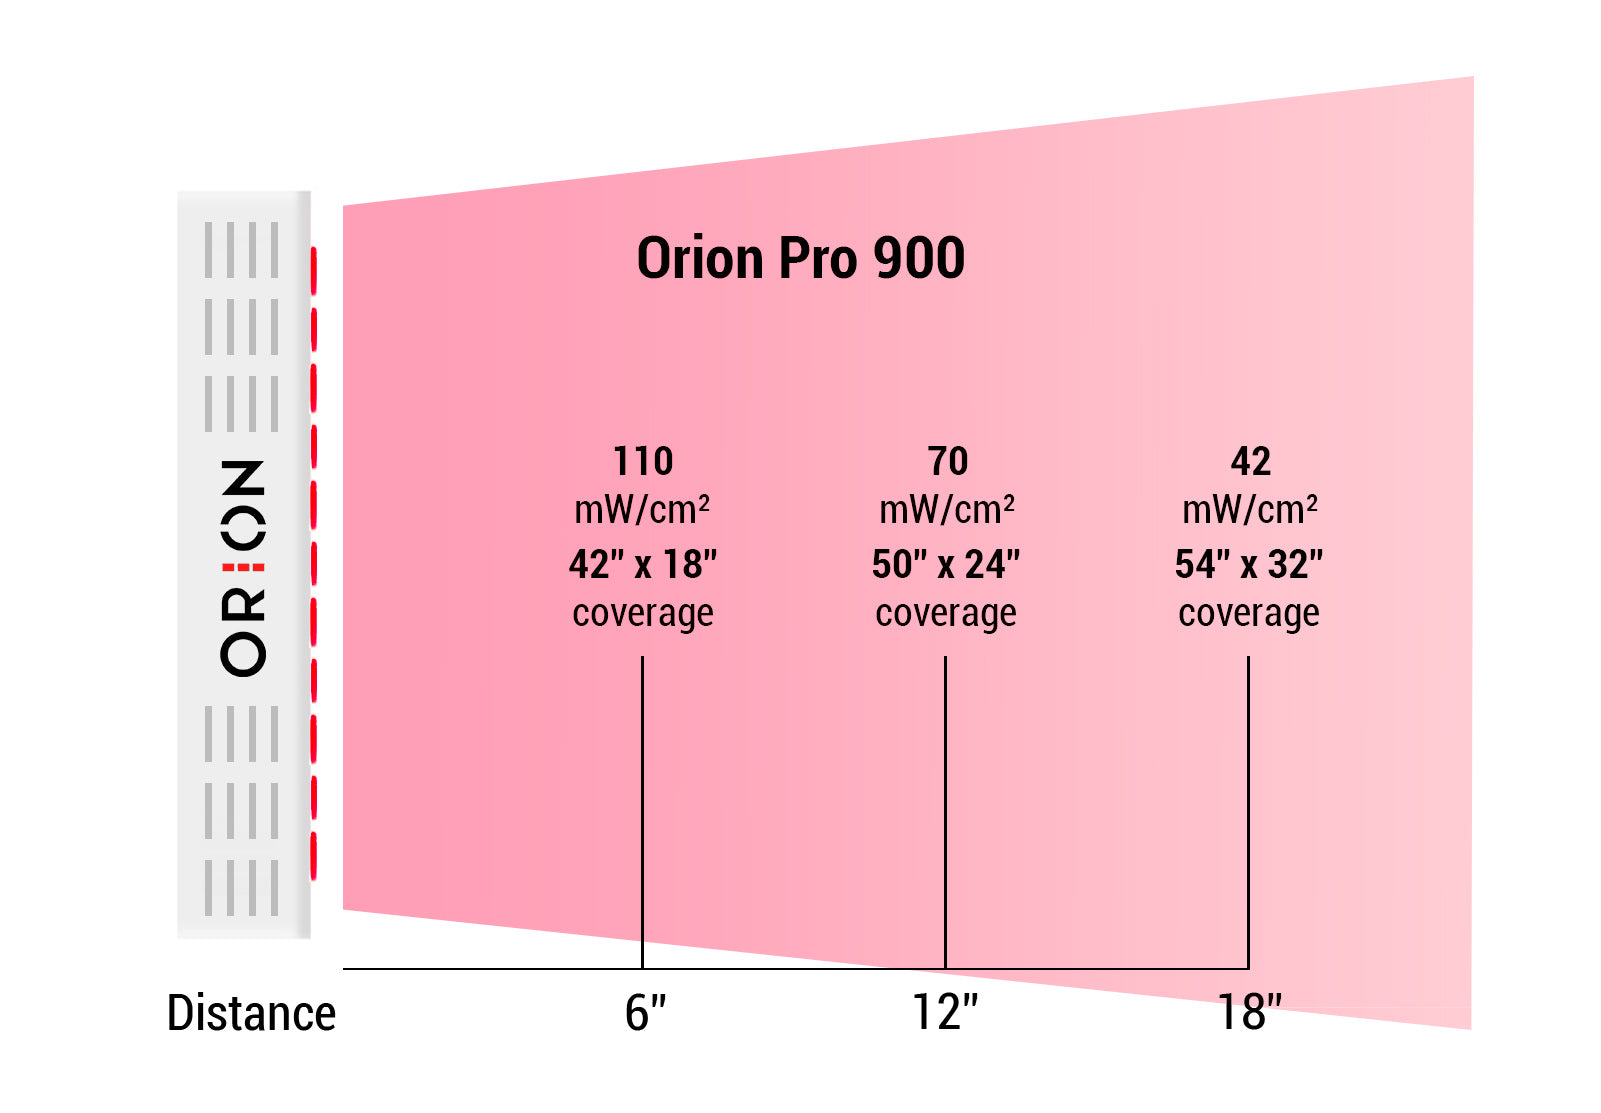 Orion Pro 900 Irradiance Levels | Orion Red Light Therapy